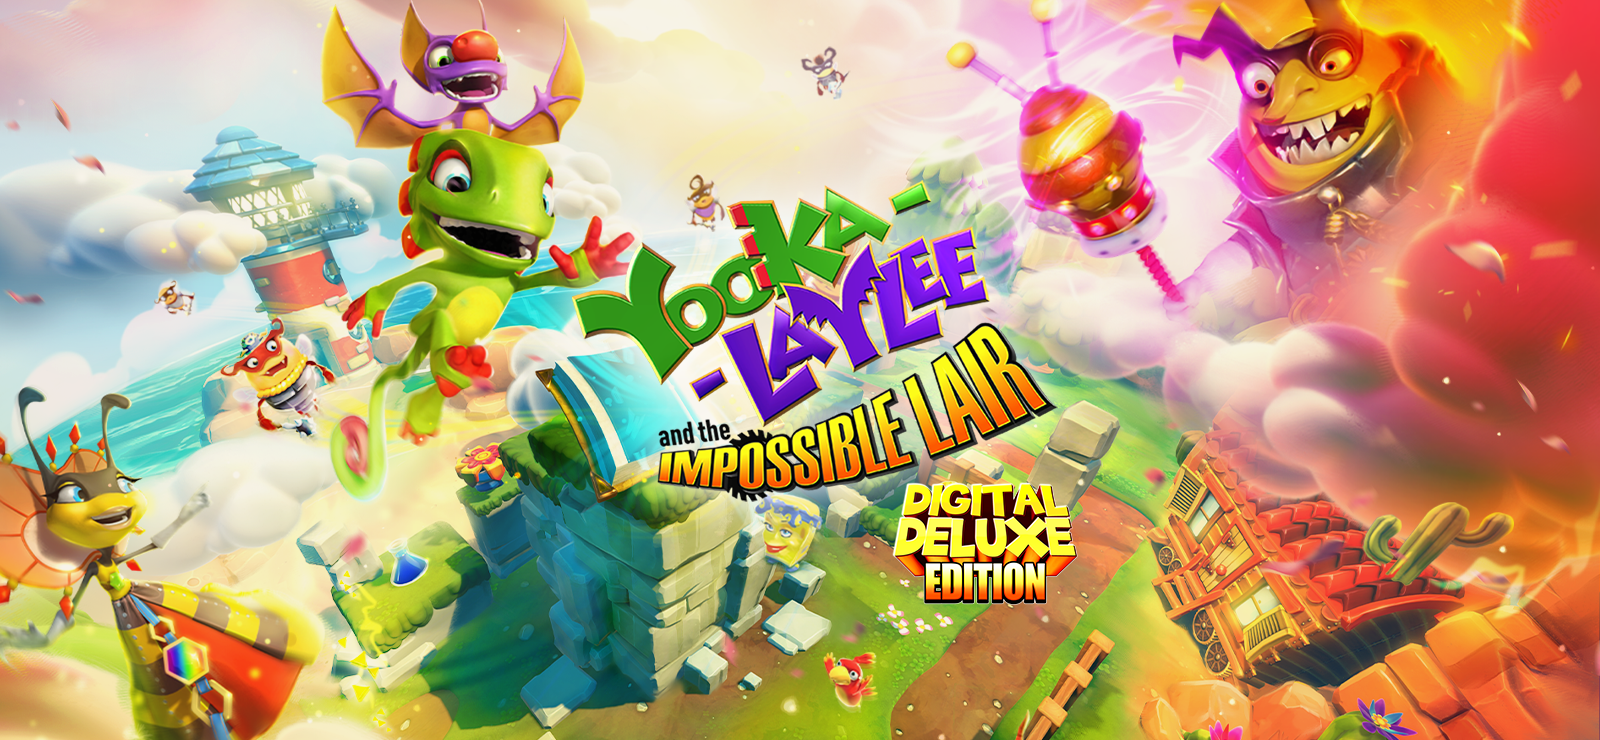 Yooka-Laylee And The Impossible Lair: Digital Deluxe Edition